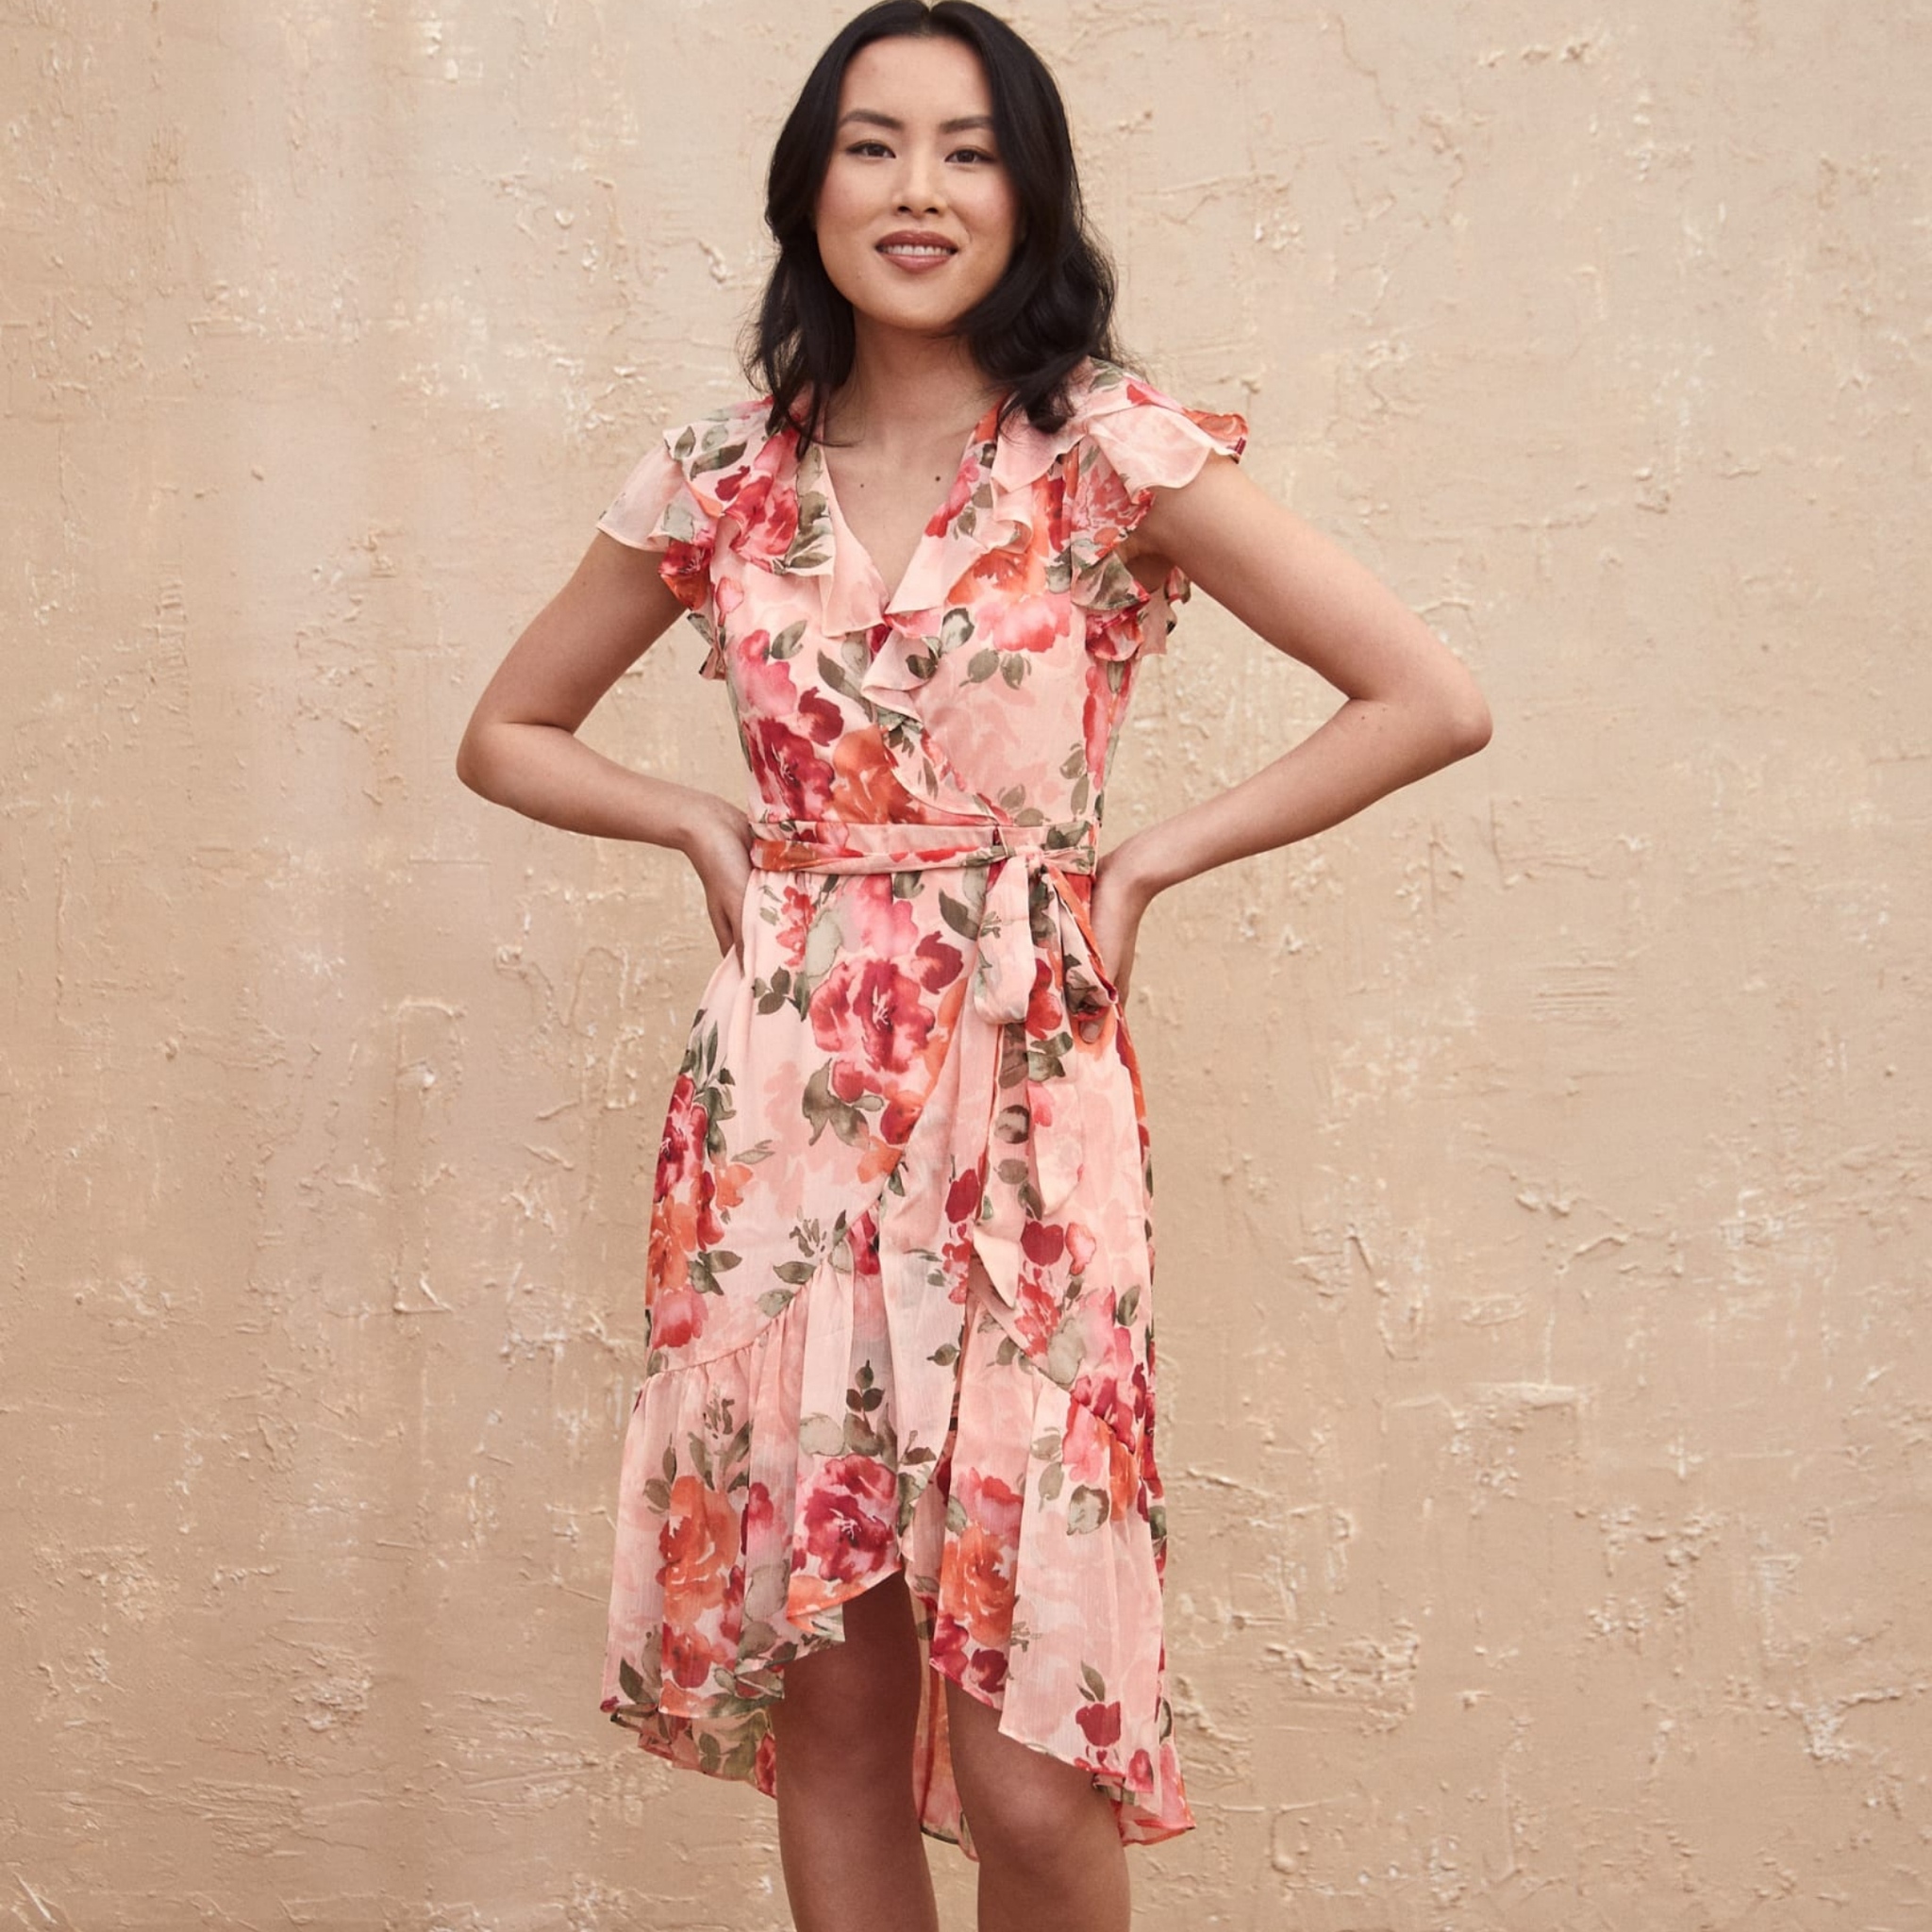 A dark haired woman models a floral pink dress from Laura.